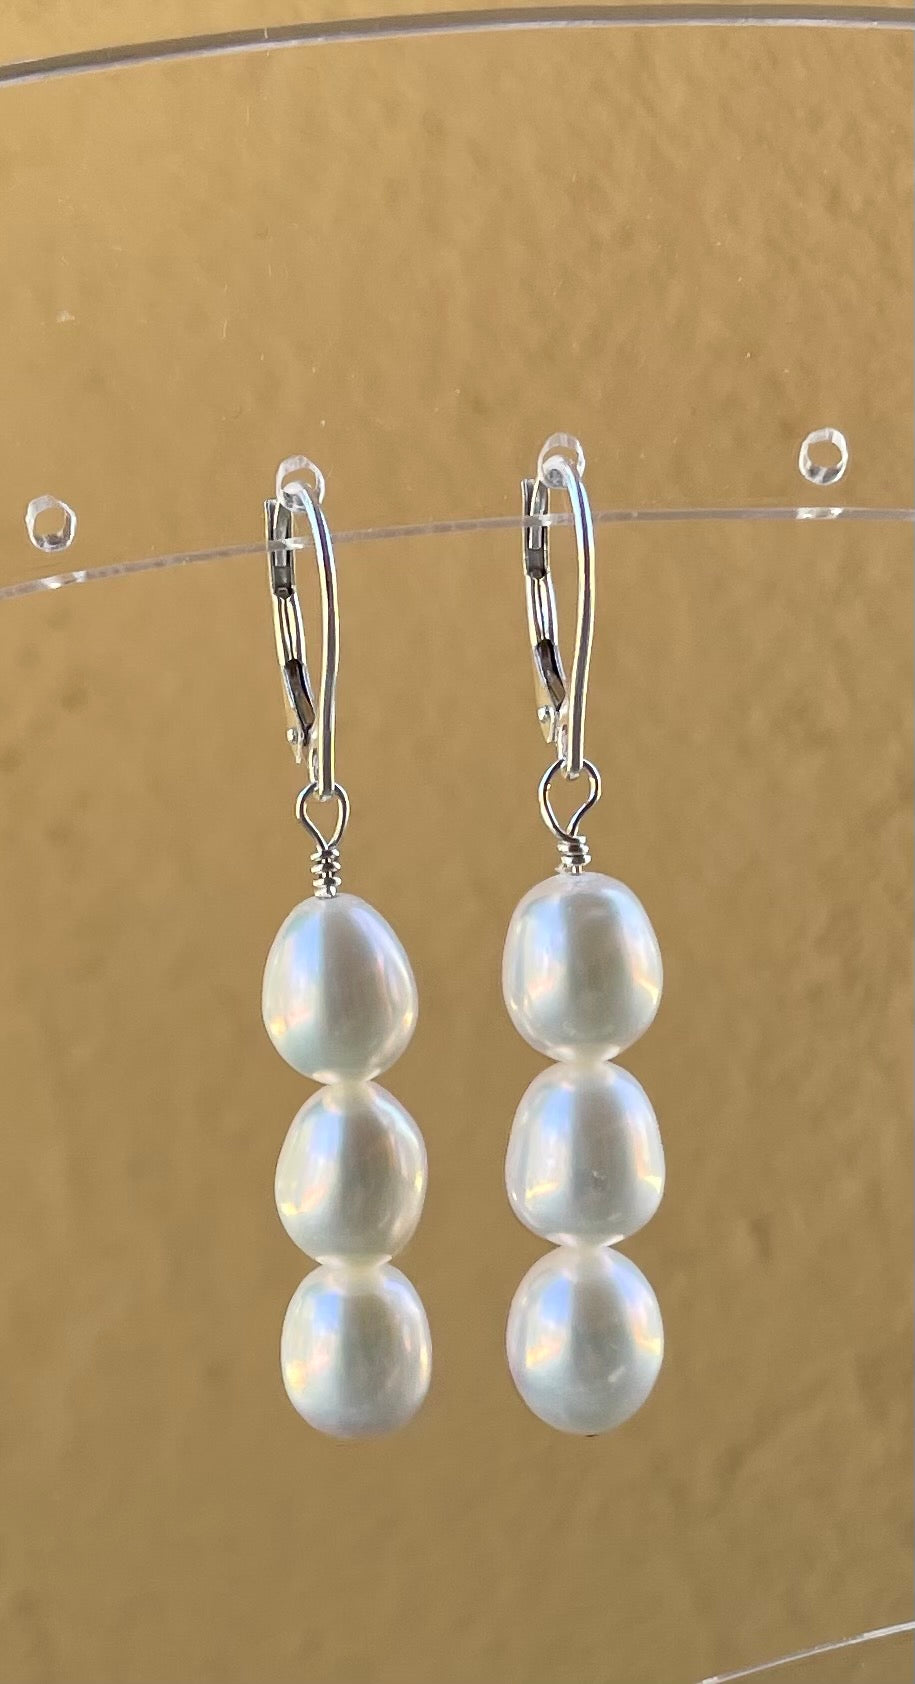 Earrings - Sterling silver with hanging white pearls